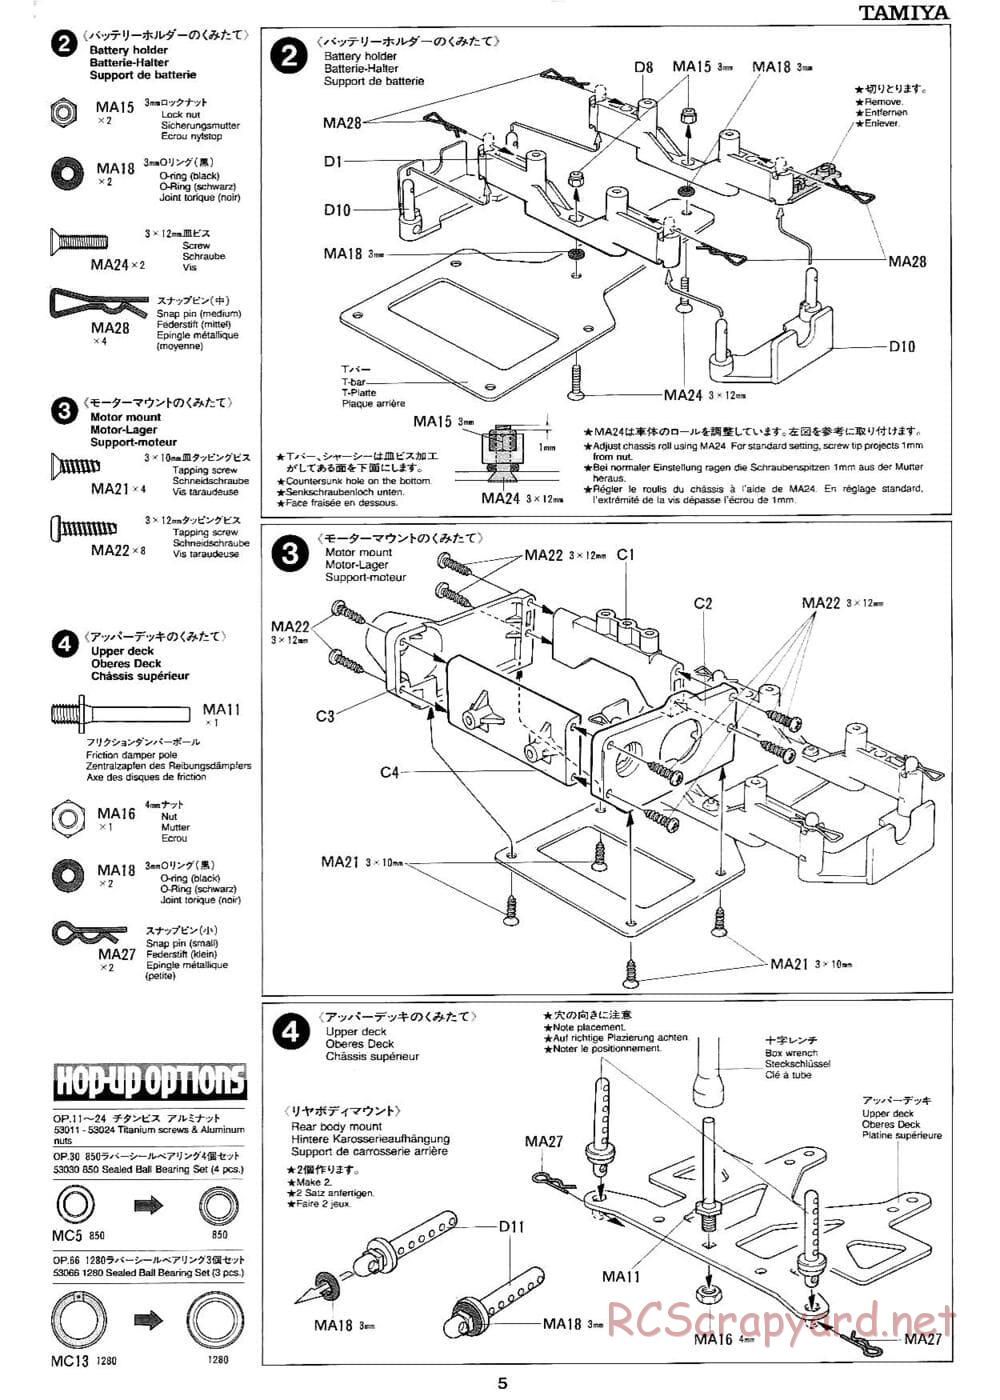 Tamiya - Toyota GT-One TS020 - F103RS Chassis - Manual - Page 5